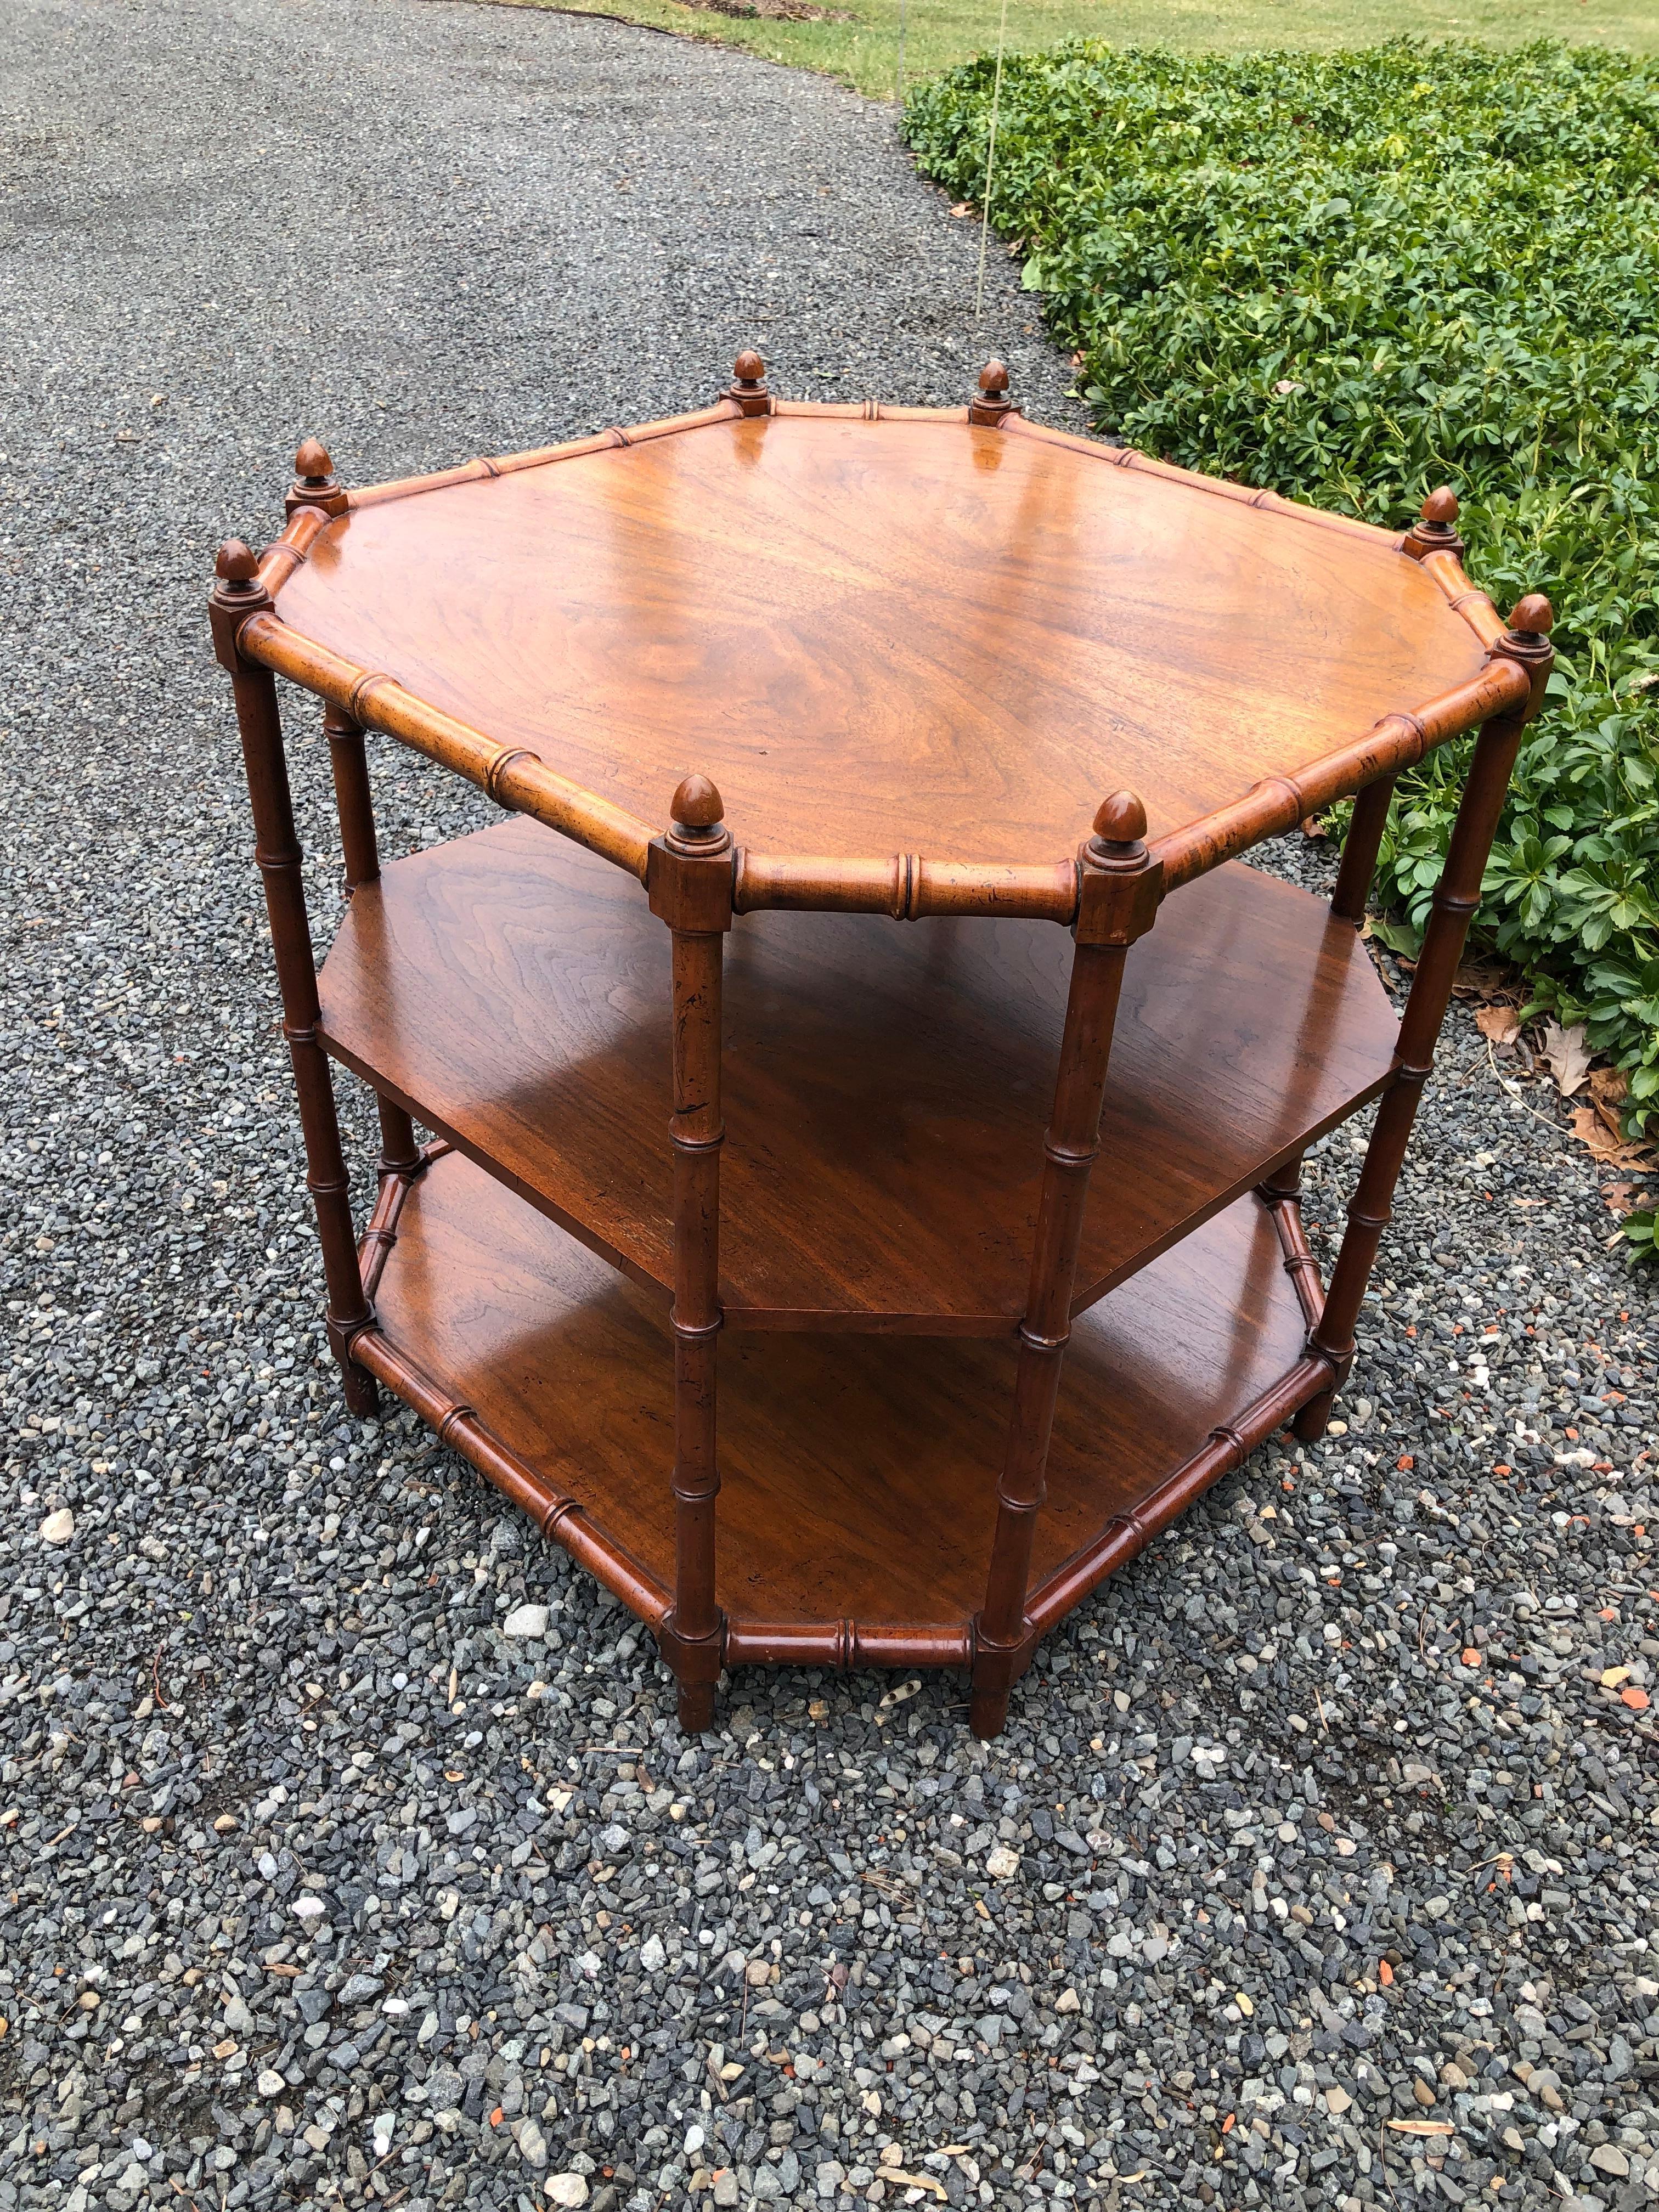 Hollywood regency faux bamboo end table in walnut. Table has three tiers and is octagonal in shape. Handsome and functional. Unmarked.